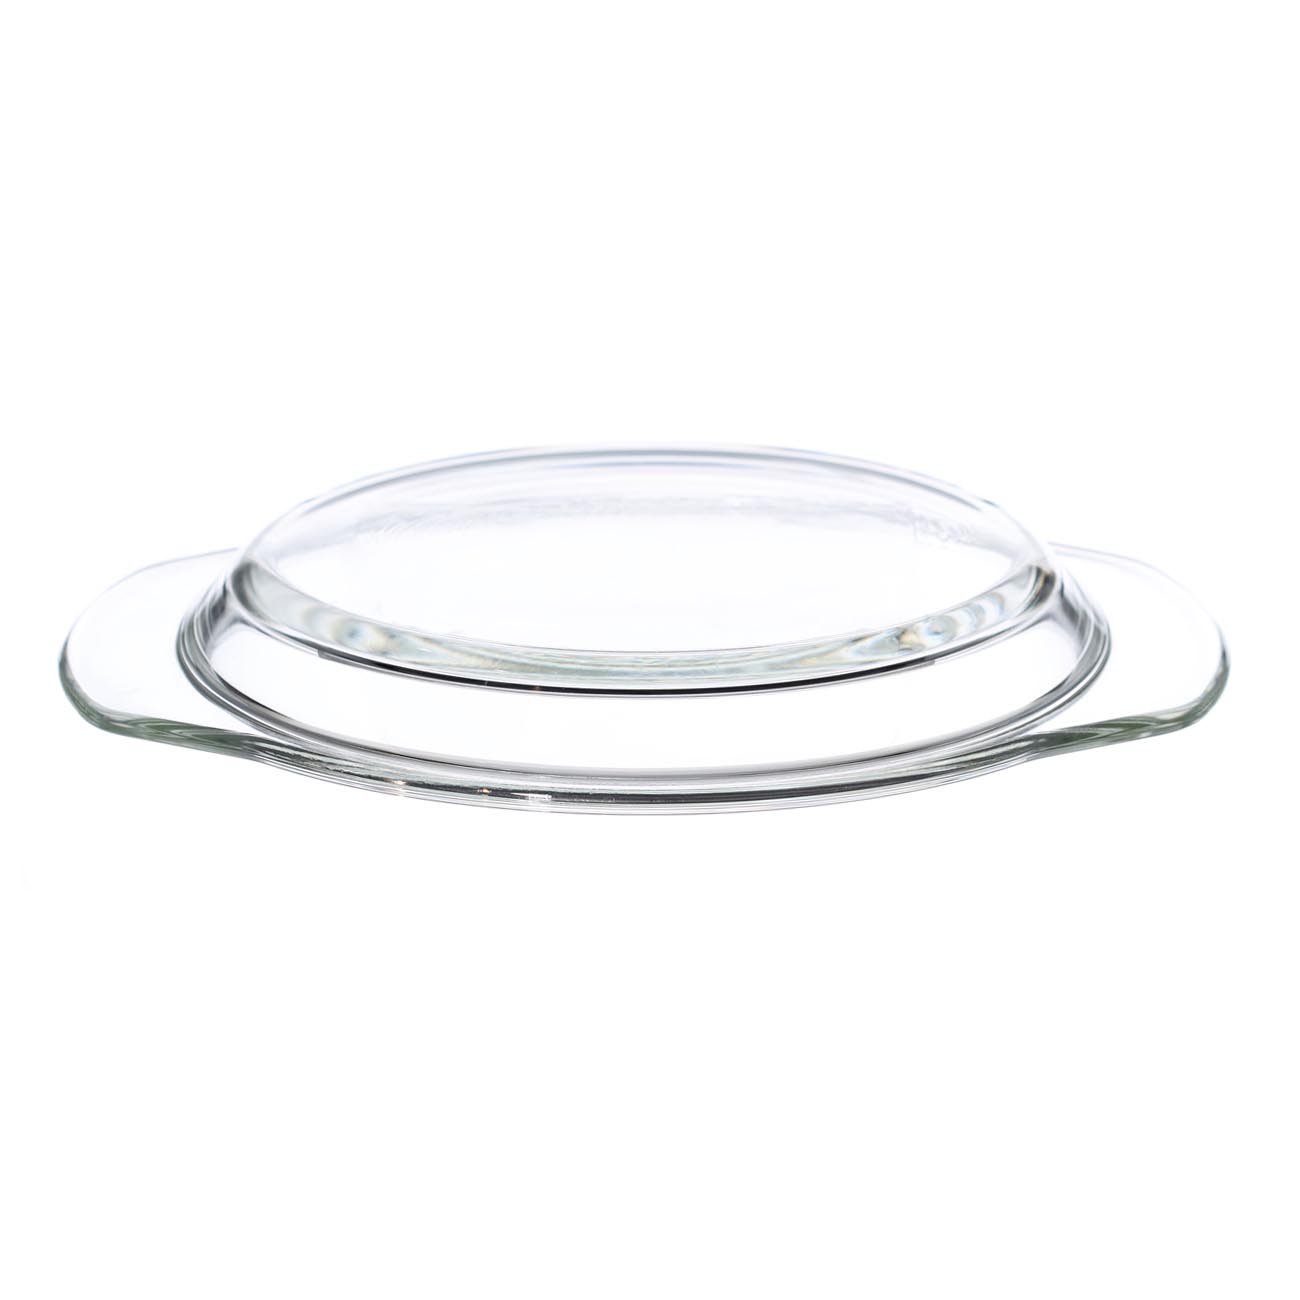 Baking dish, 22 cm, 1,5 l, with lid, Glass T, round, Cook изображение № 4